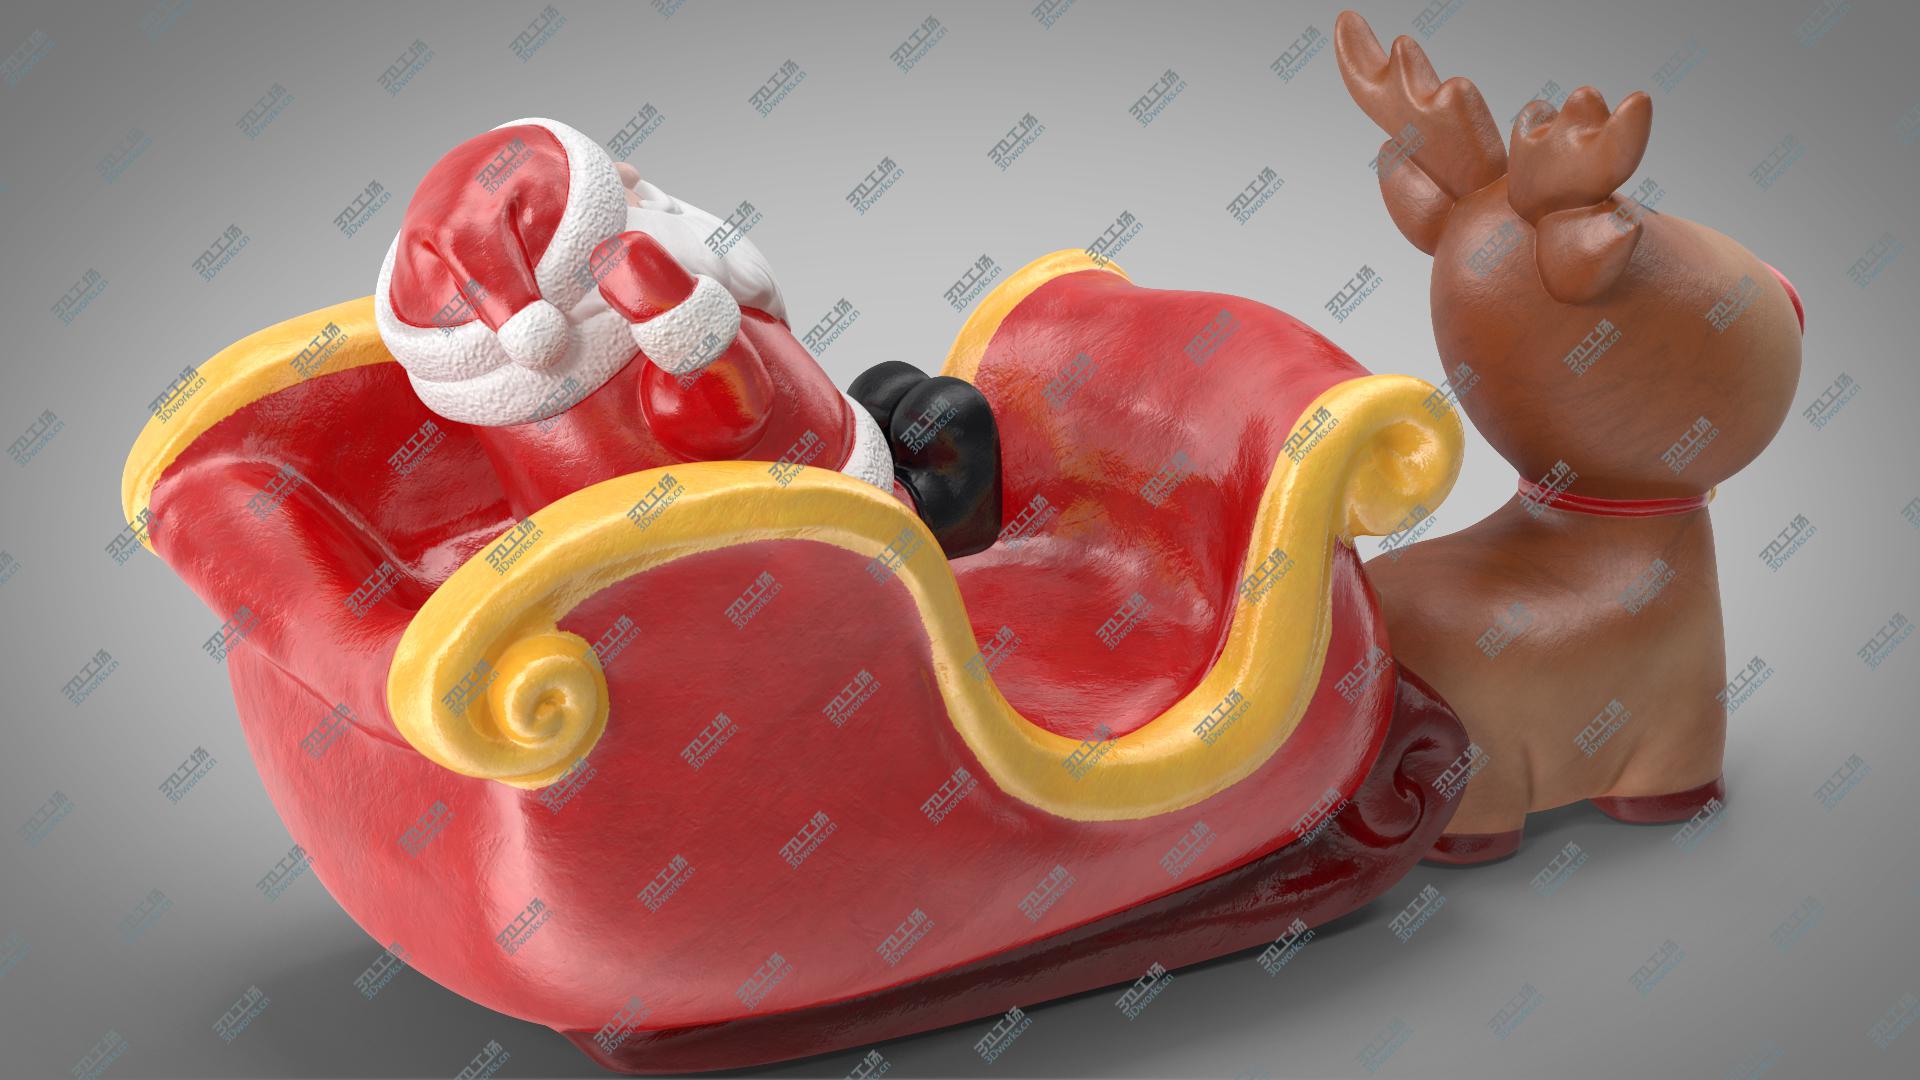 images/goods_img/202105071/Santa Claus with Sleigh Decorative Figurine 3 3D/4.jpg